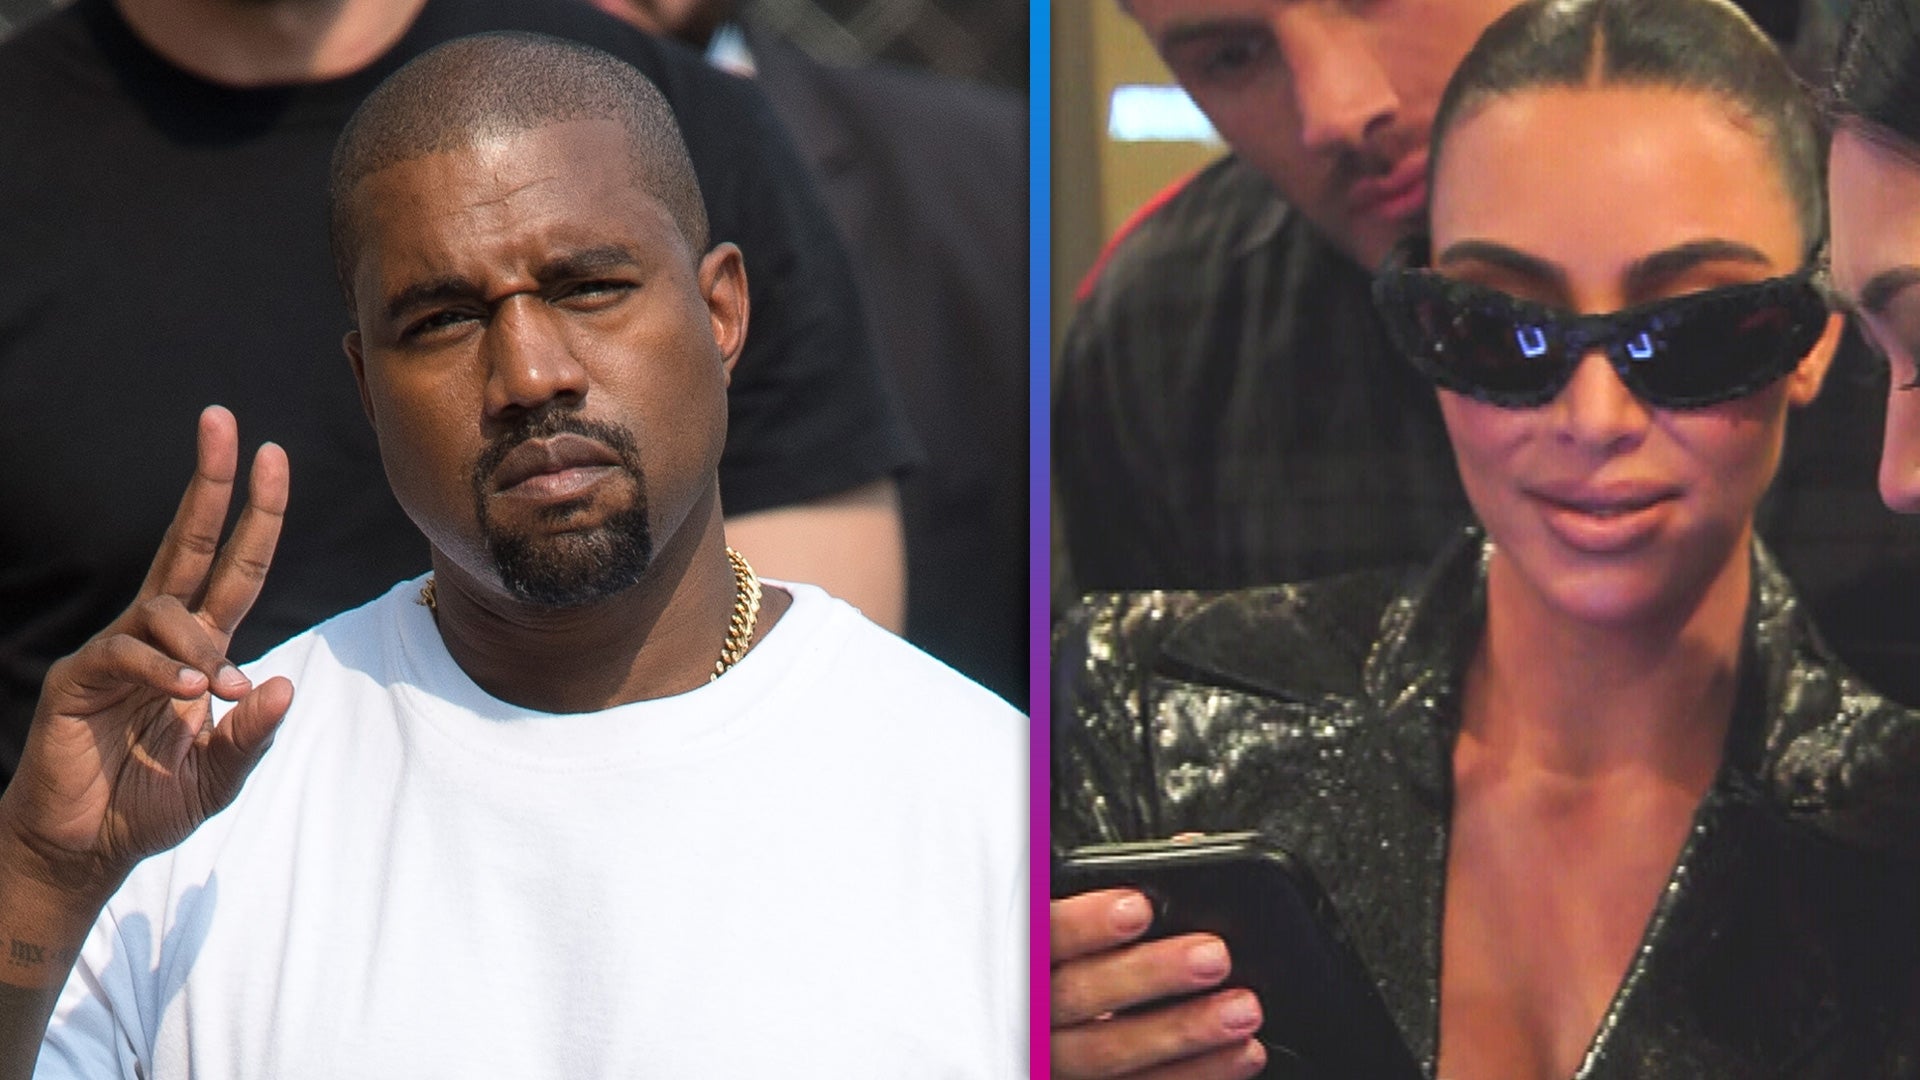 Kim Kardashian Reacts to Kanye West Taking Digs at Her Style Amid Divorce